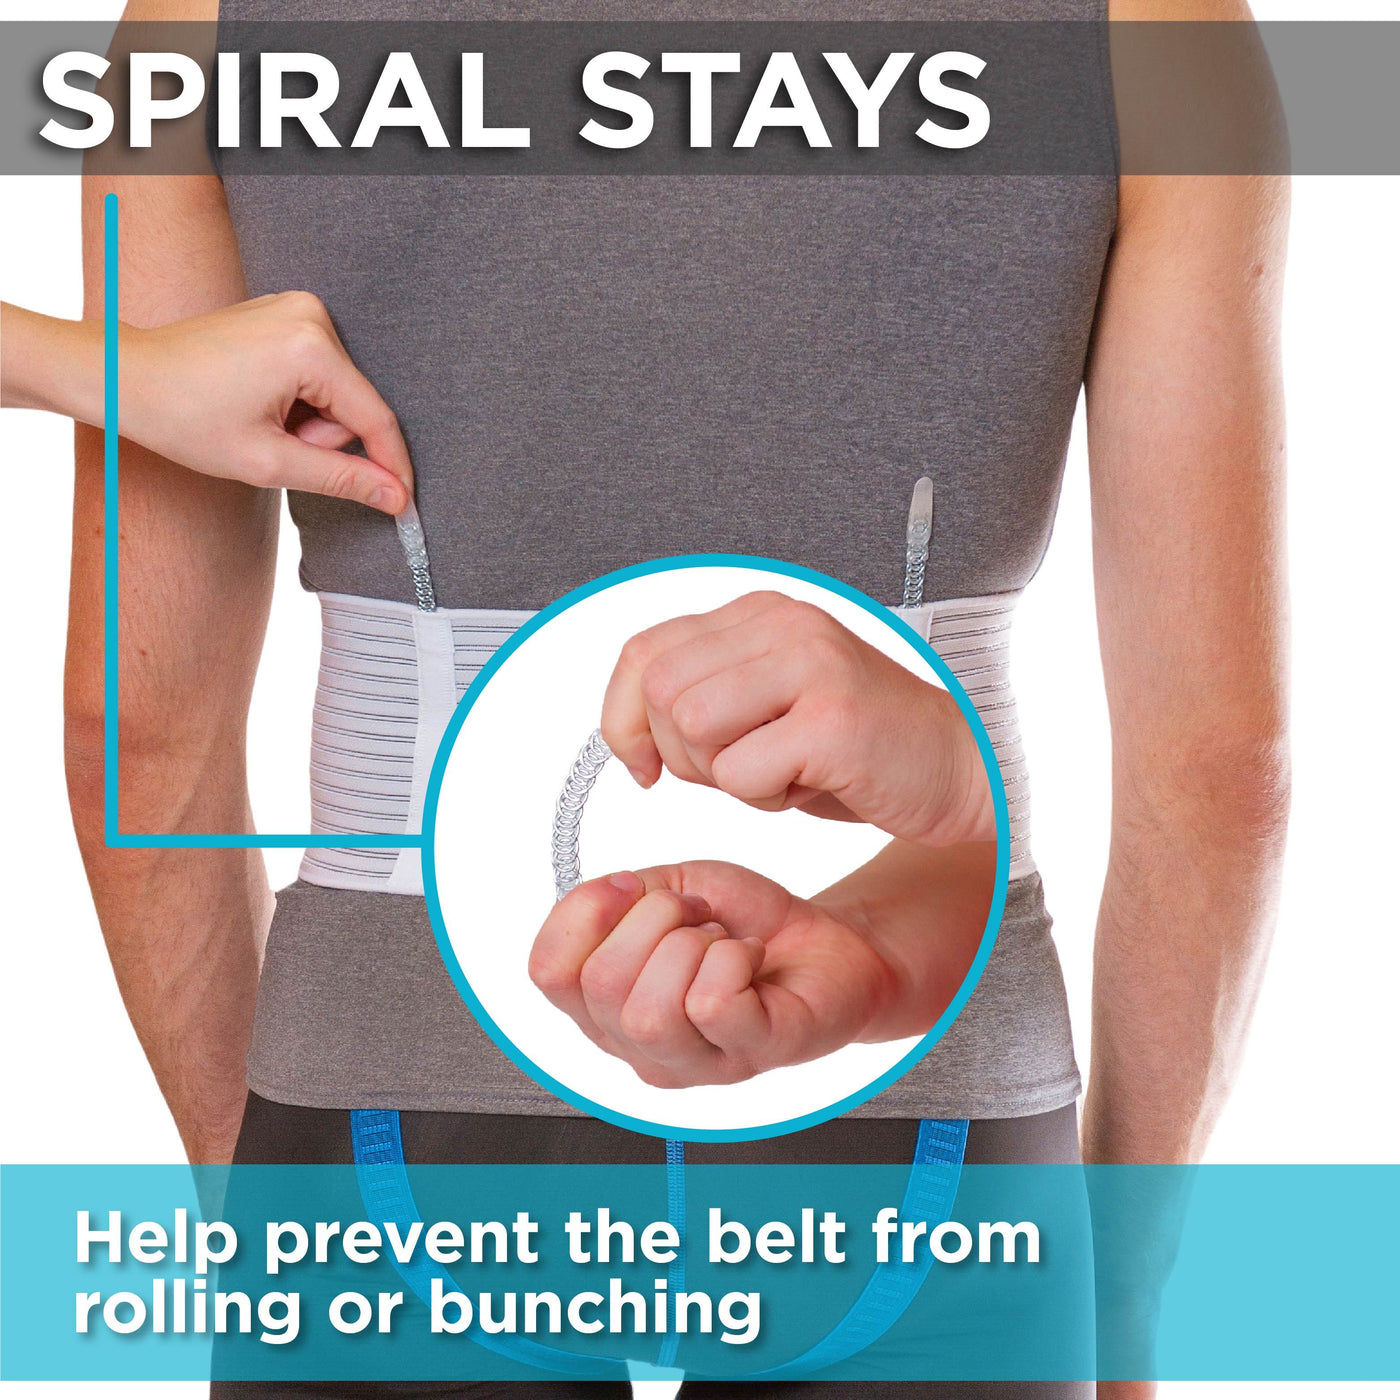 spiral stays help prevent the belt from rolling or bunching